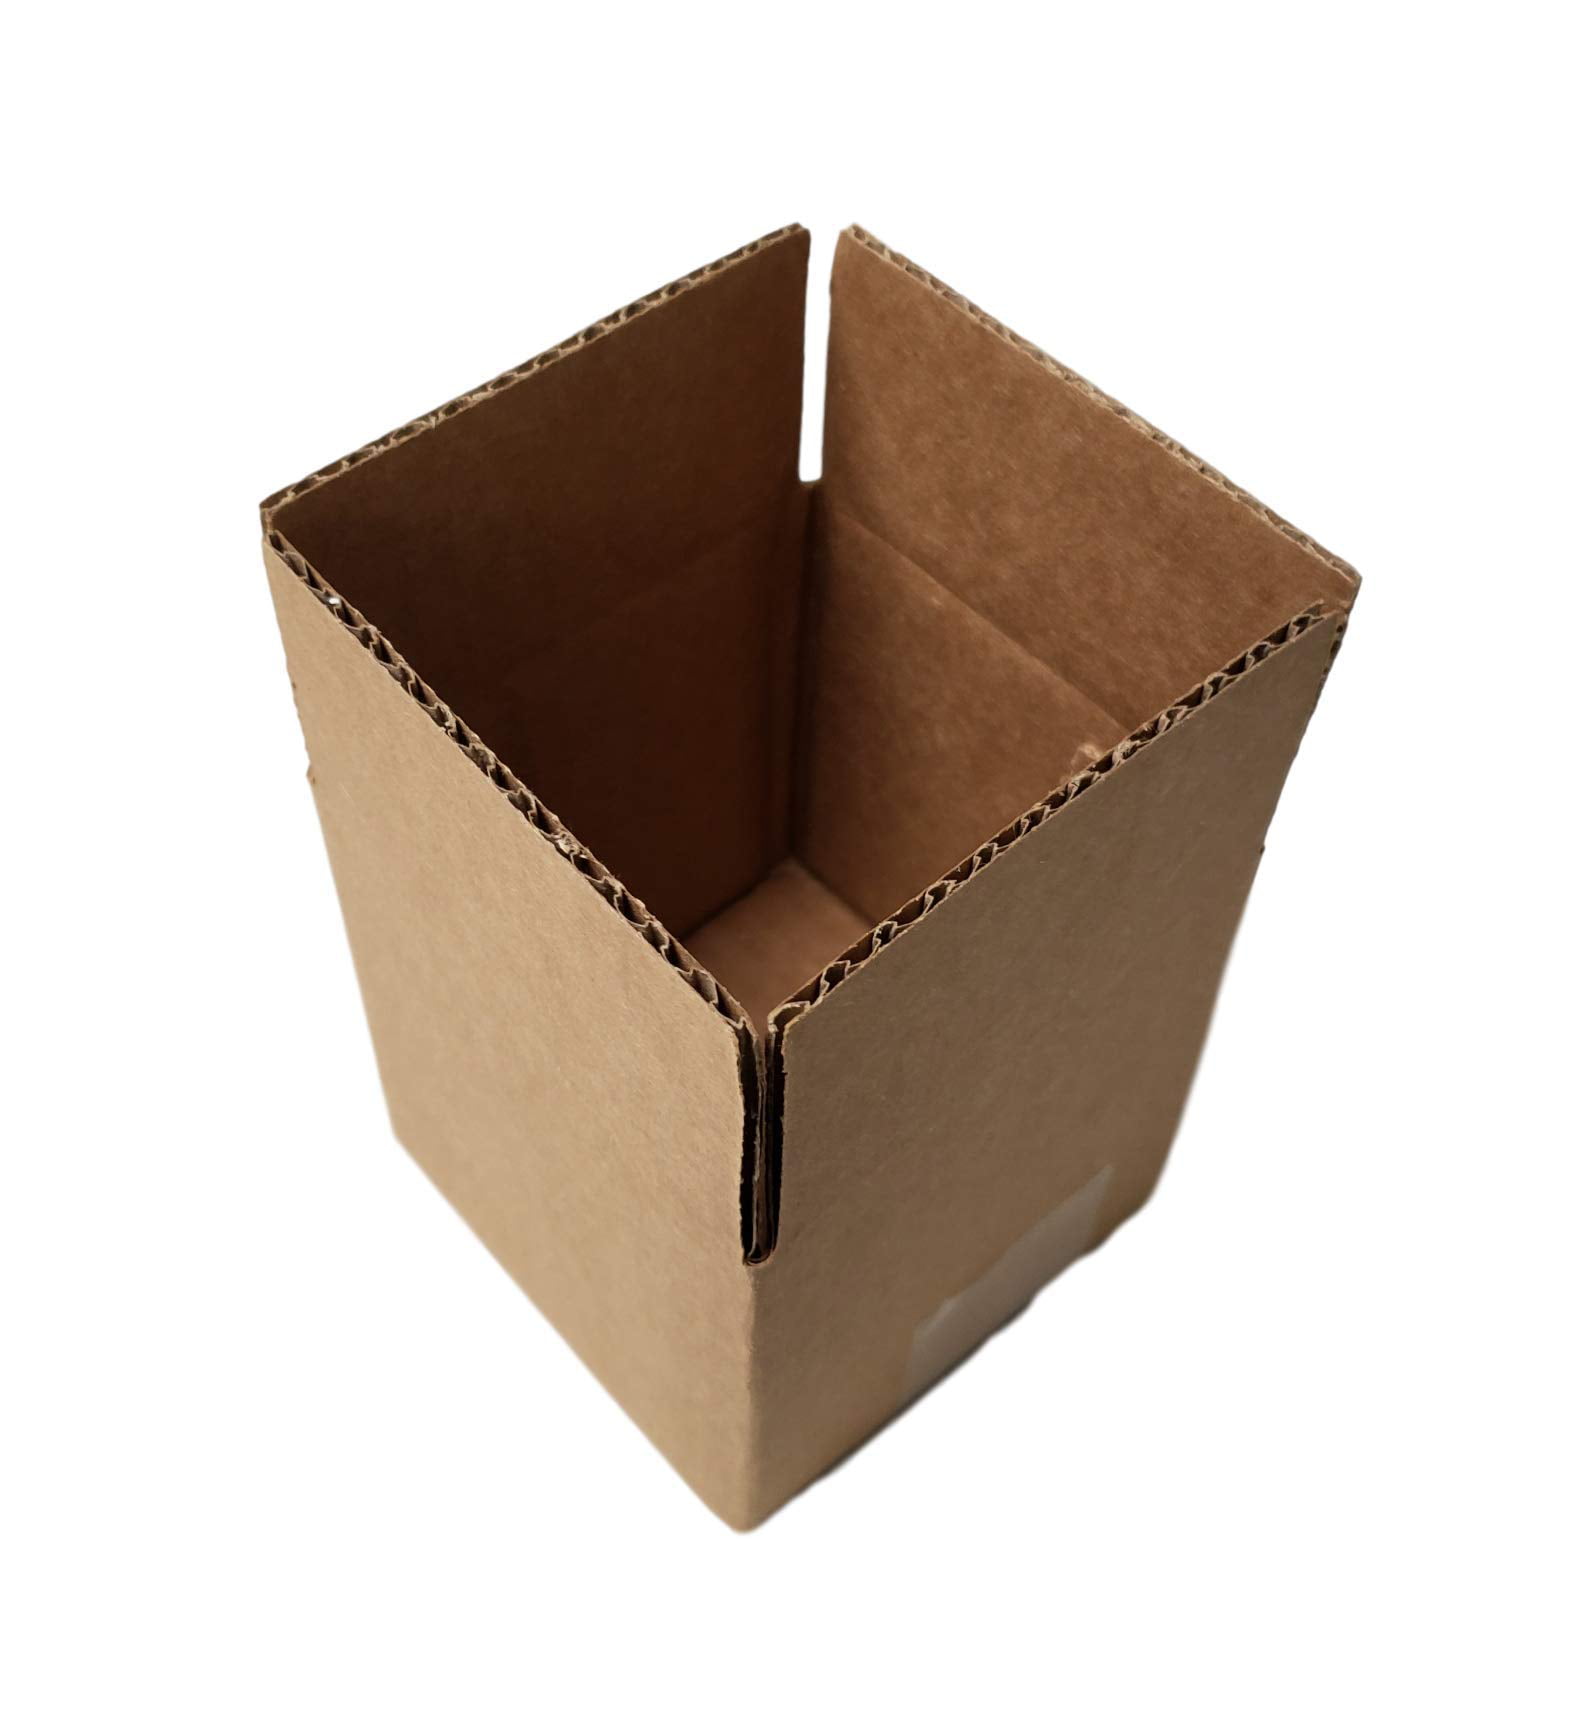 20x SMALL MAILING PACKING CARDBOARD BOXES 4x4x4" CUBE SINGLE WALL 